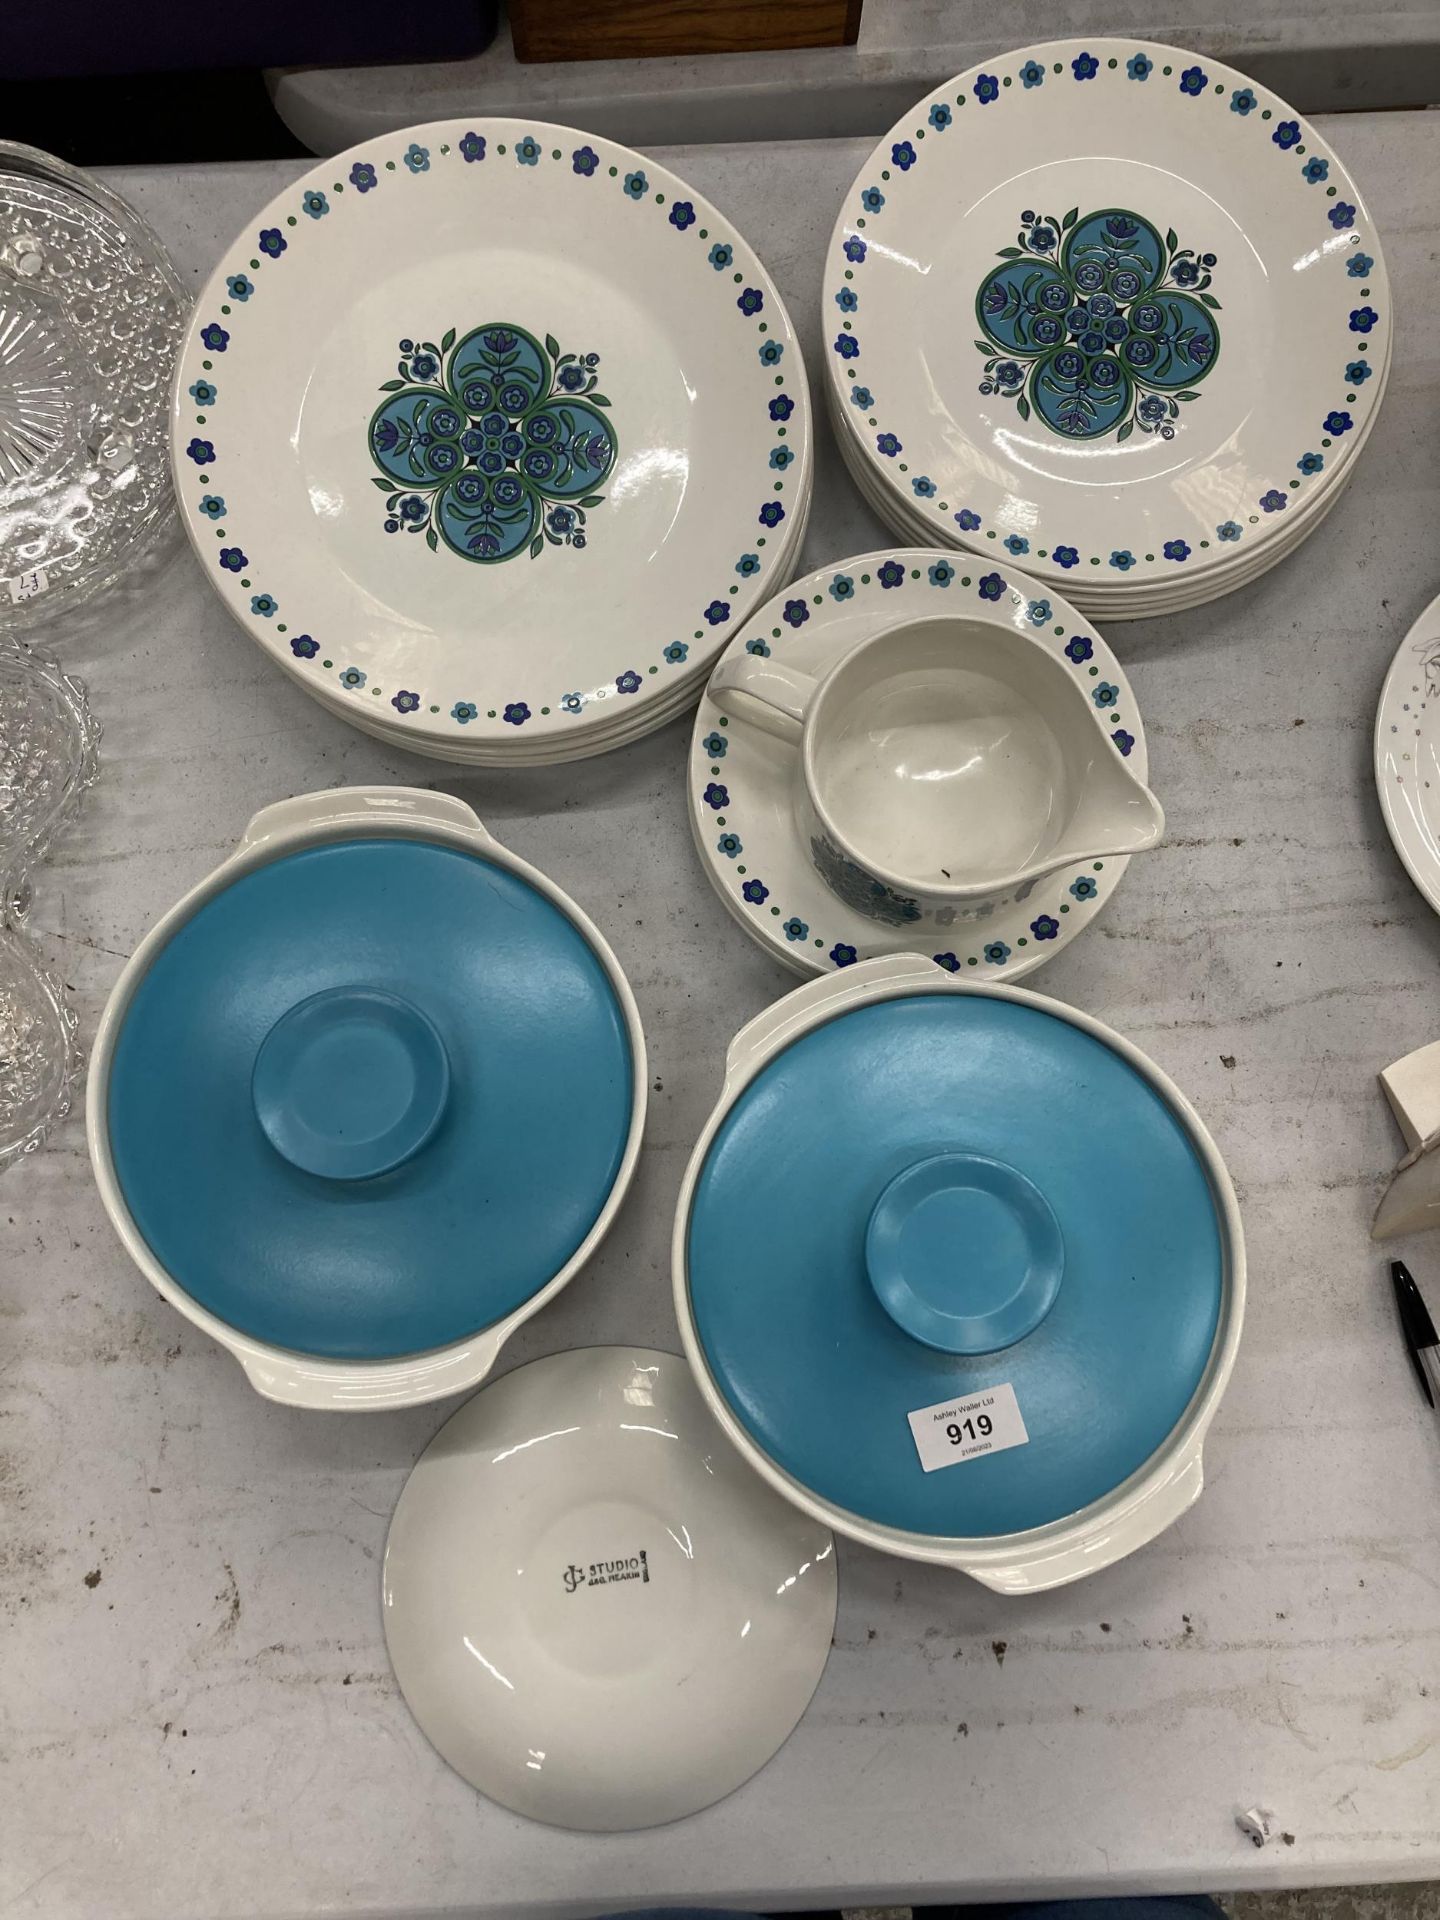 A QUANTITY OF J & G MEAKIN DINNERWARE TO INCLUDE PLATES, CASSEROLE/SERVING DISHES, SAUCE BOAT, ETC - Image 5 of 5